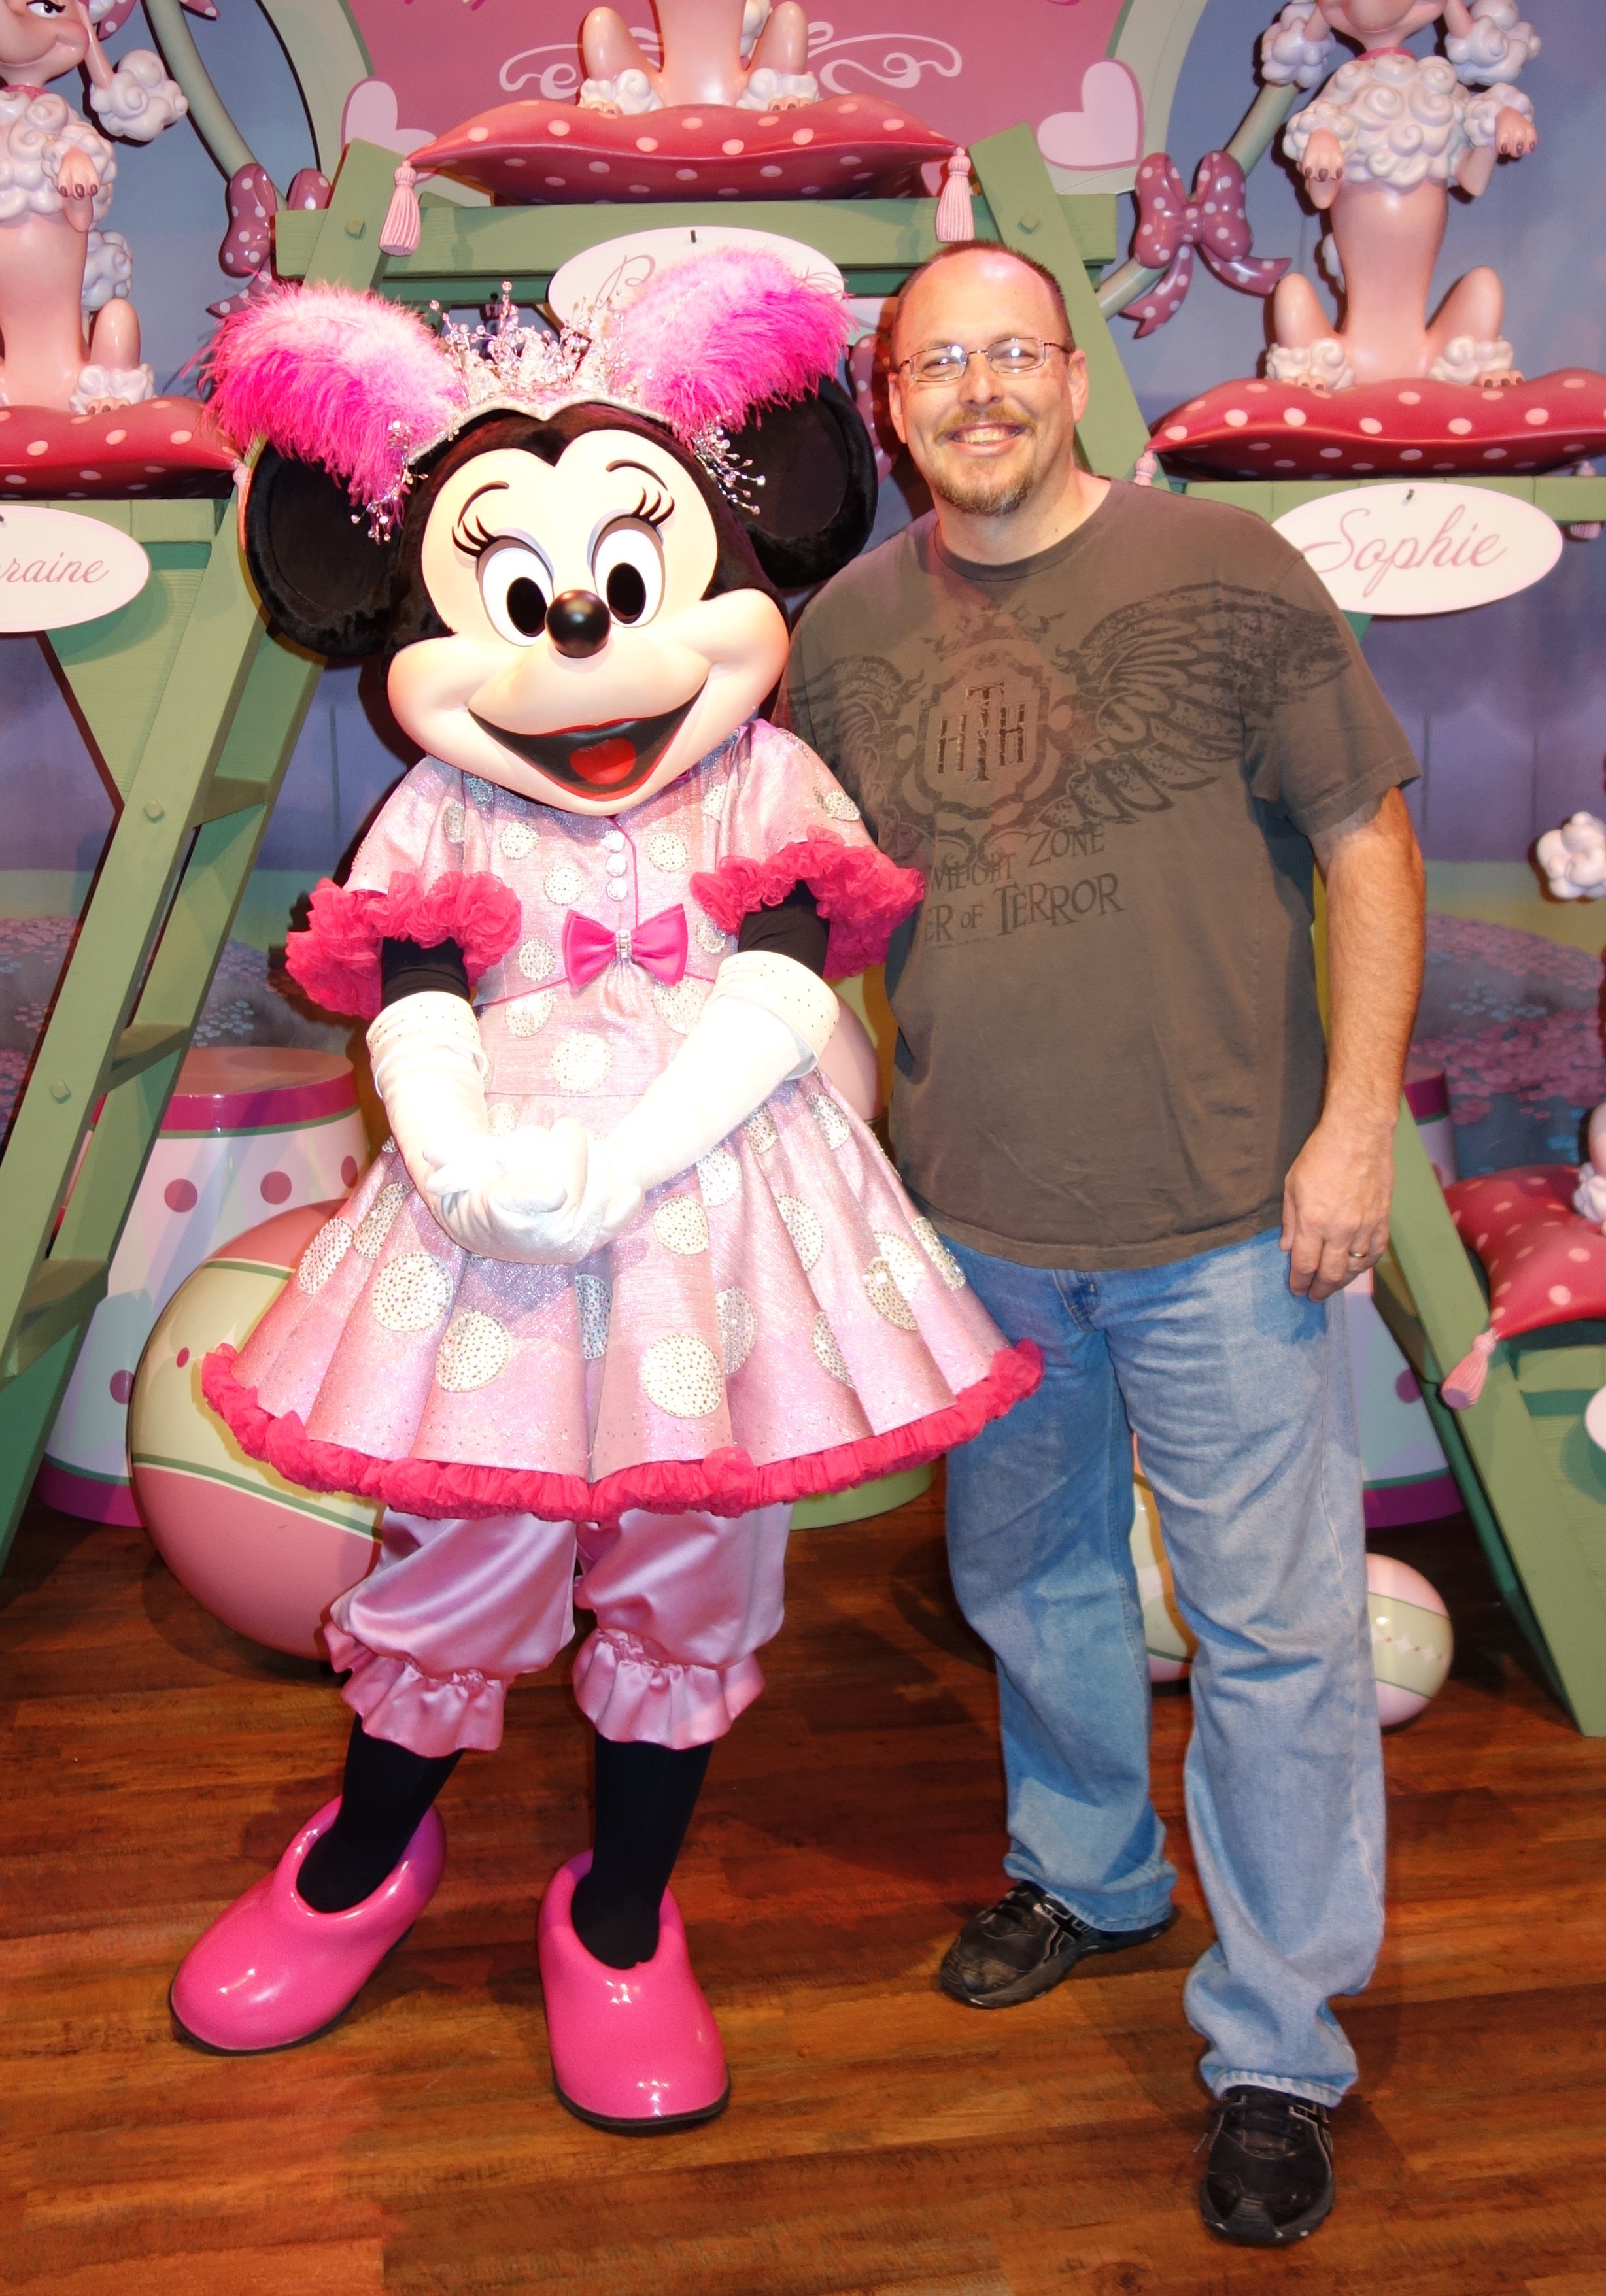 I need a fun idea for a mid-forties married man with children to pose with Minnie Mouse in this location.  I can't do the dancer pose!